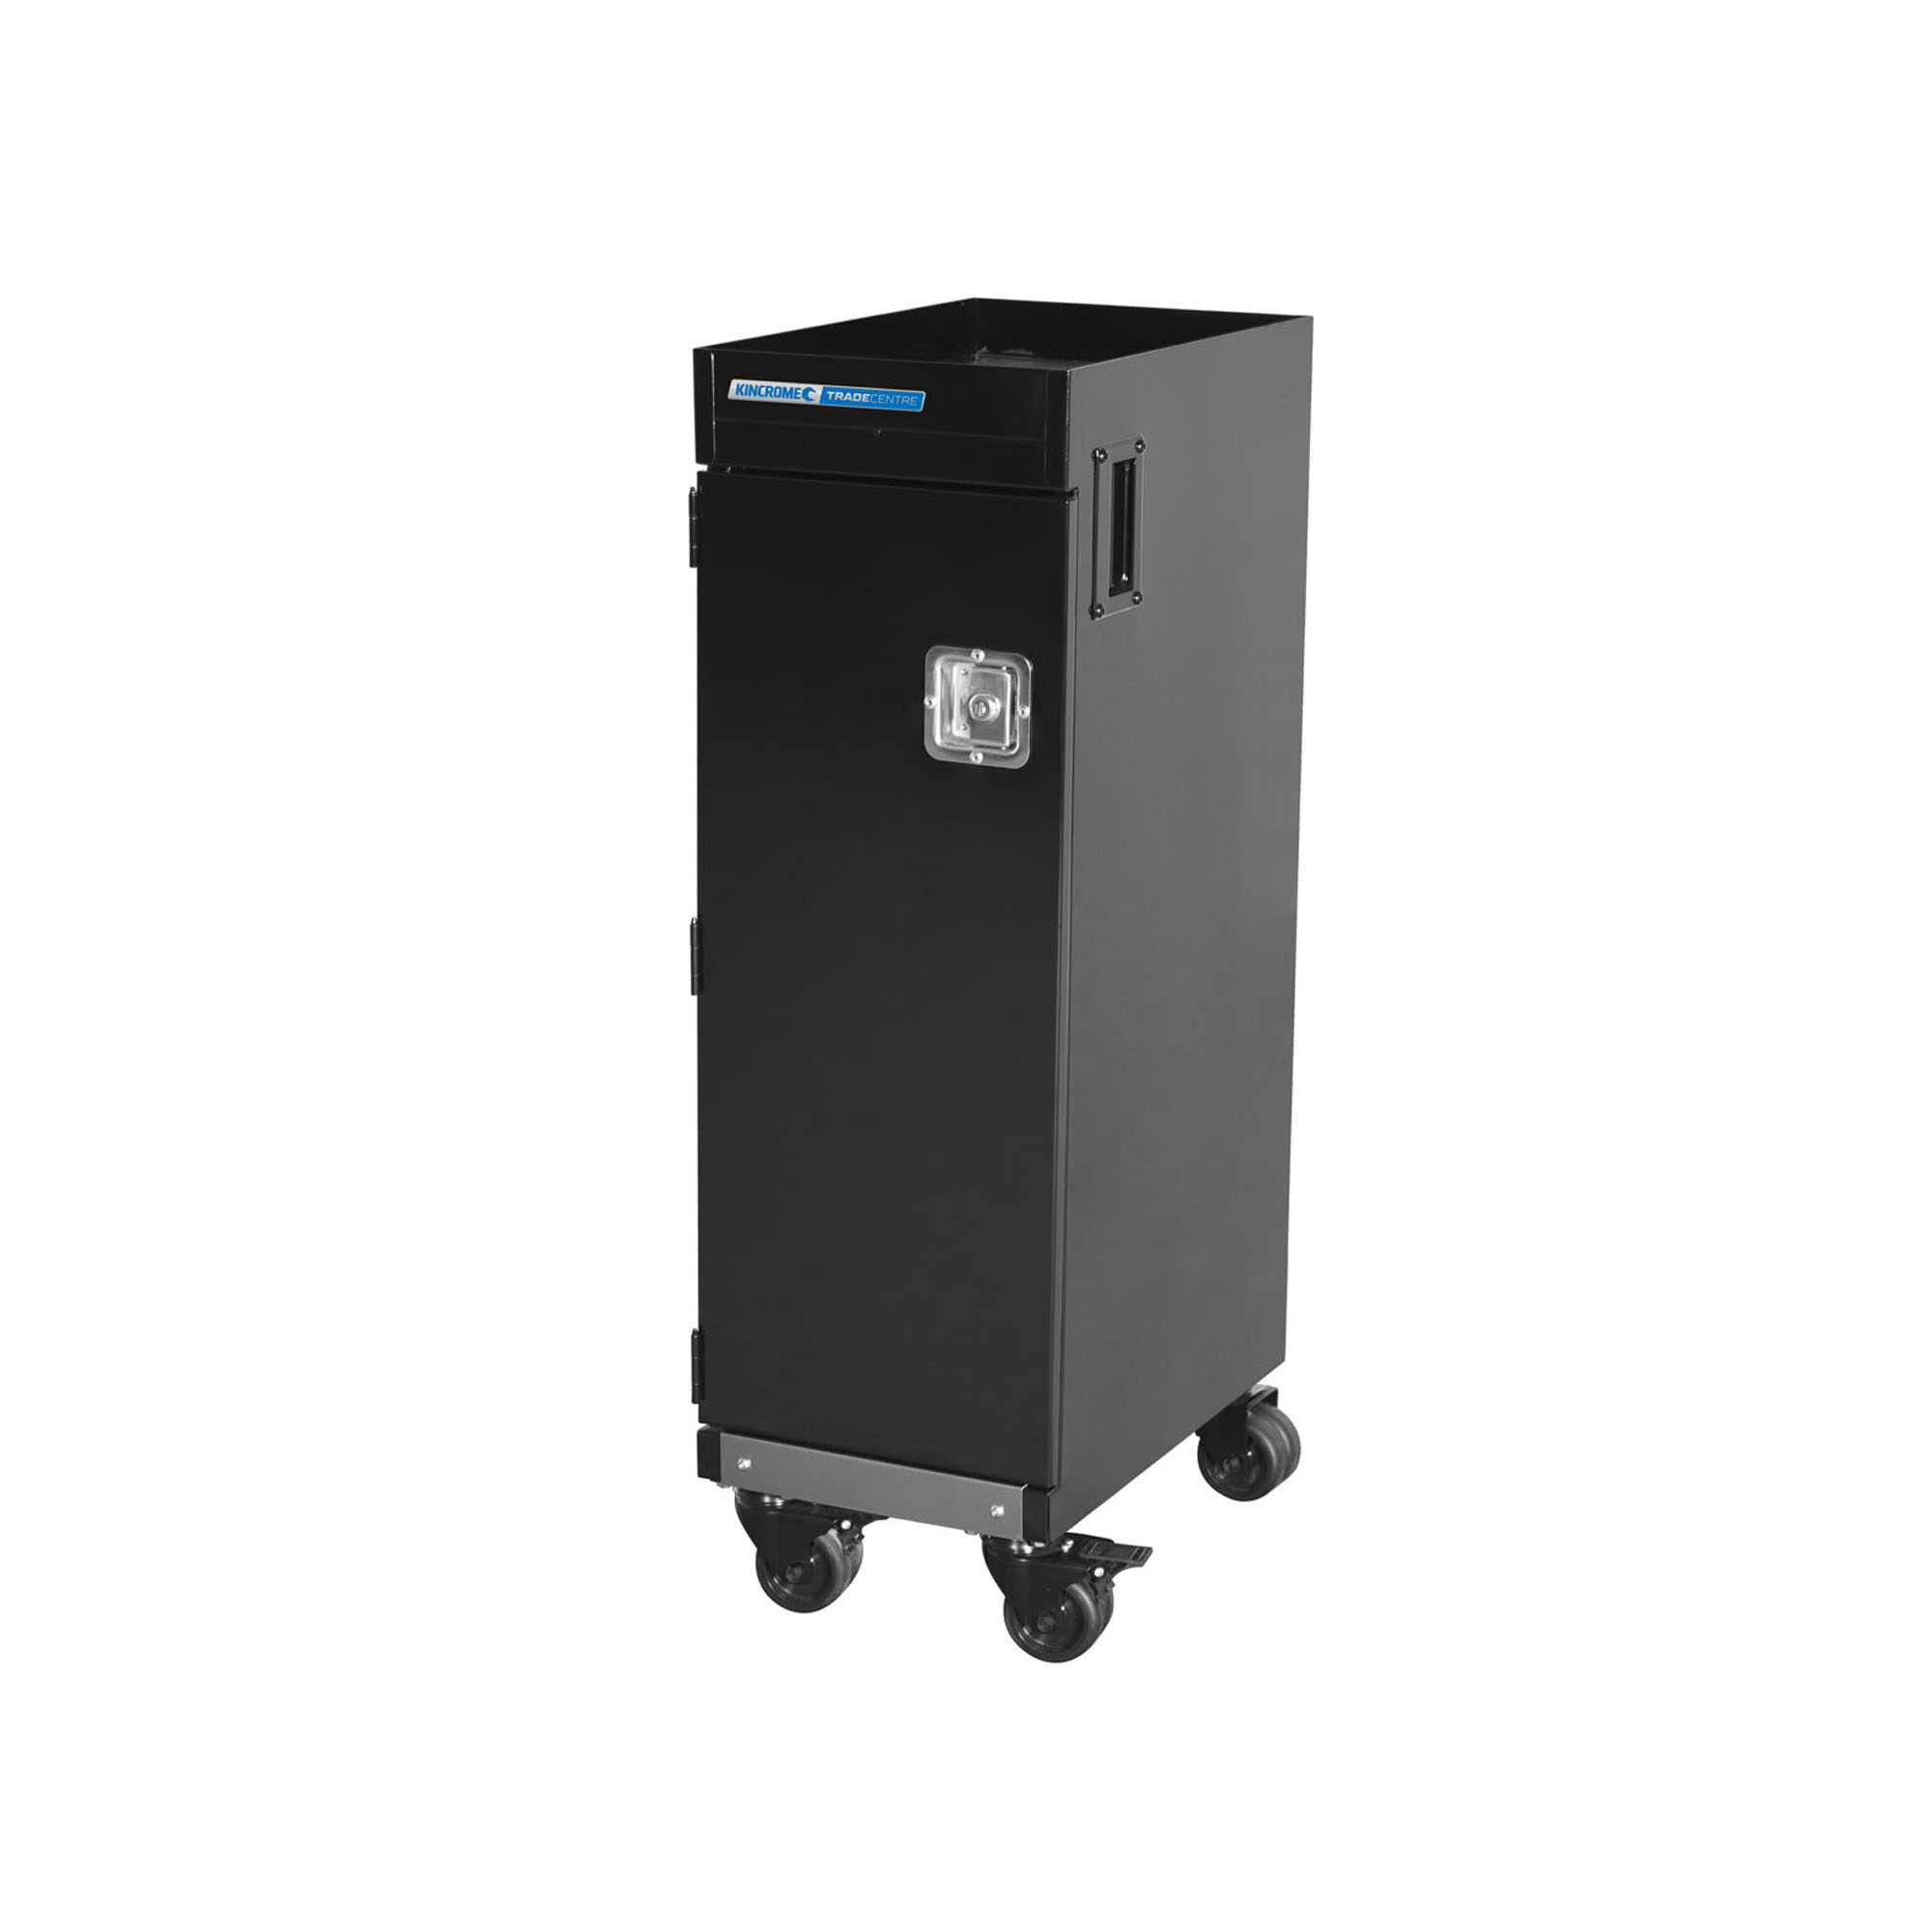 MOBILE PARTS TROLLEY